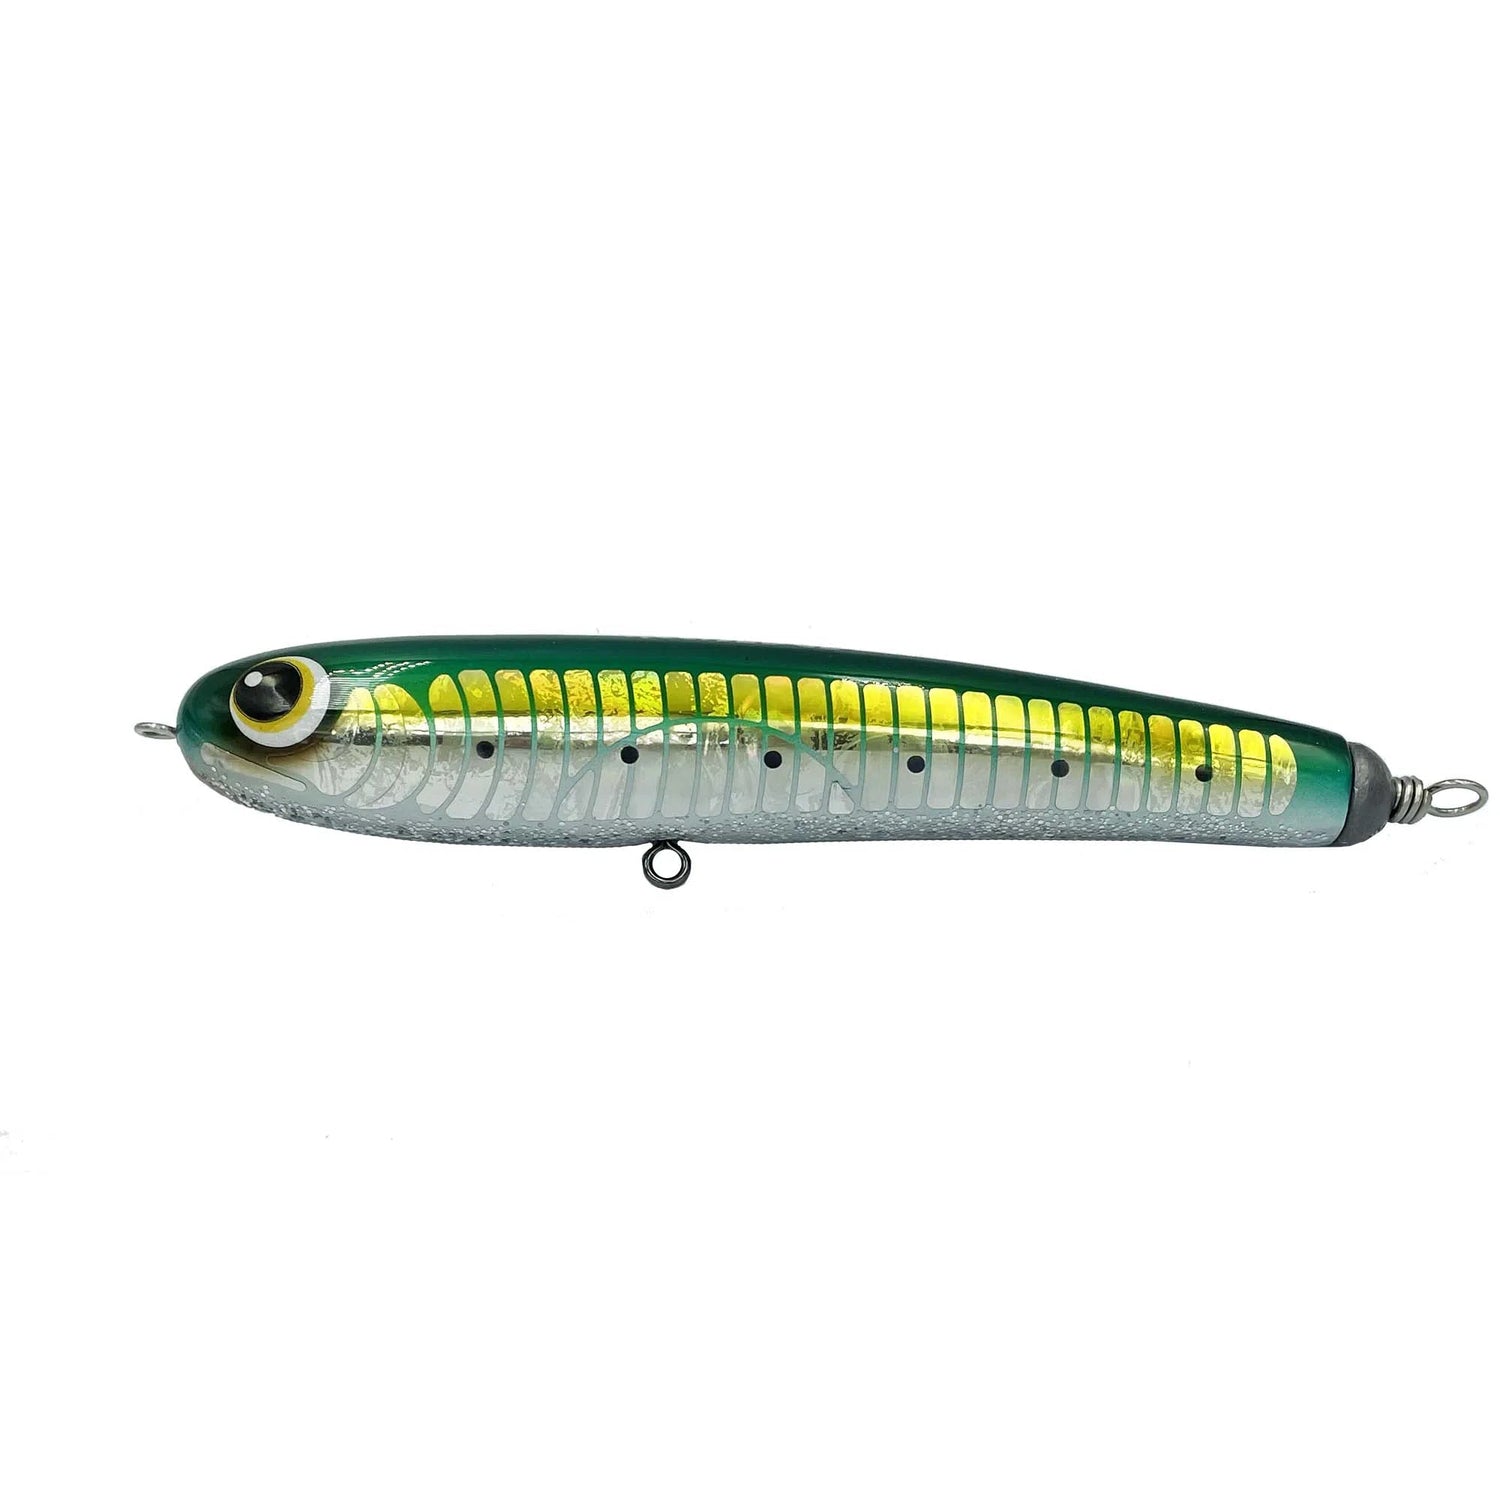 ASWB ReefsEDGE Dropoff Floating Stickbait M Series-Lure - Poppers, Stickbaits & Pencils-ASWB-Pacific Pilly-Fishing Station